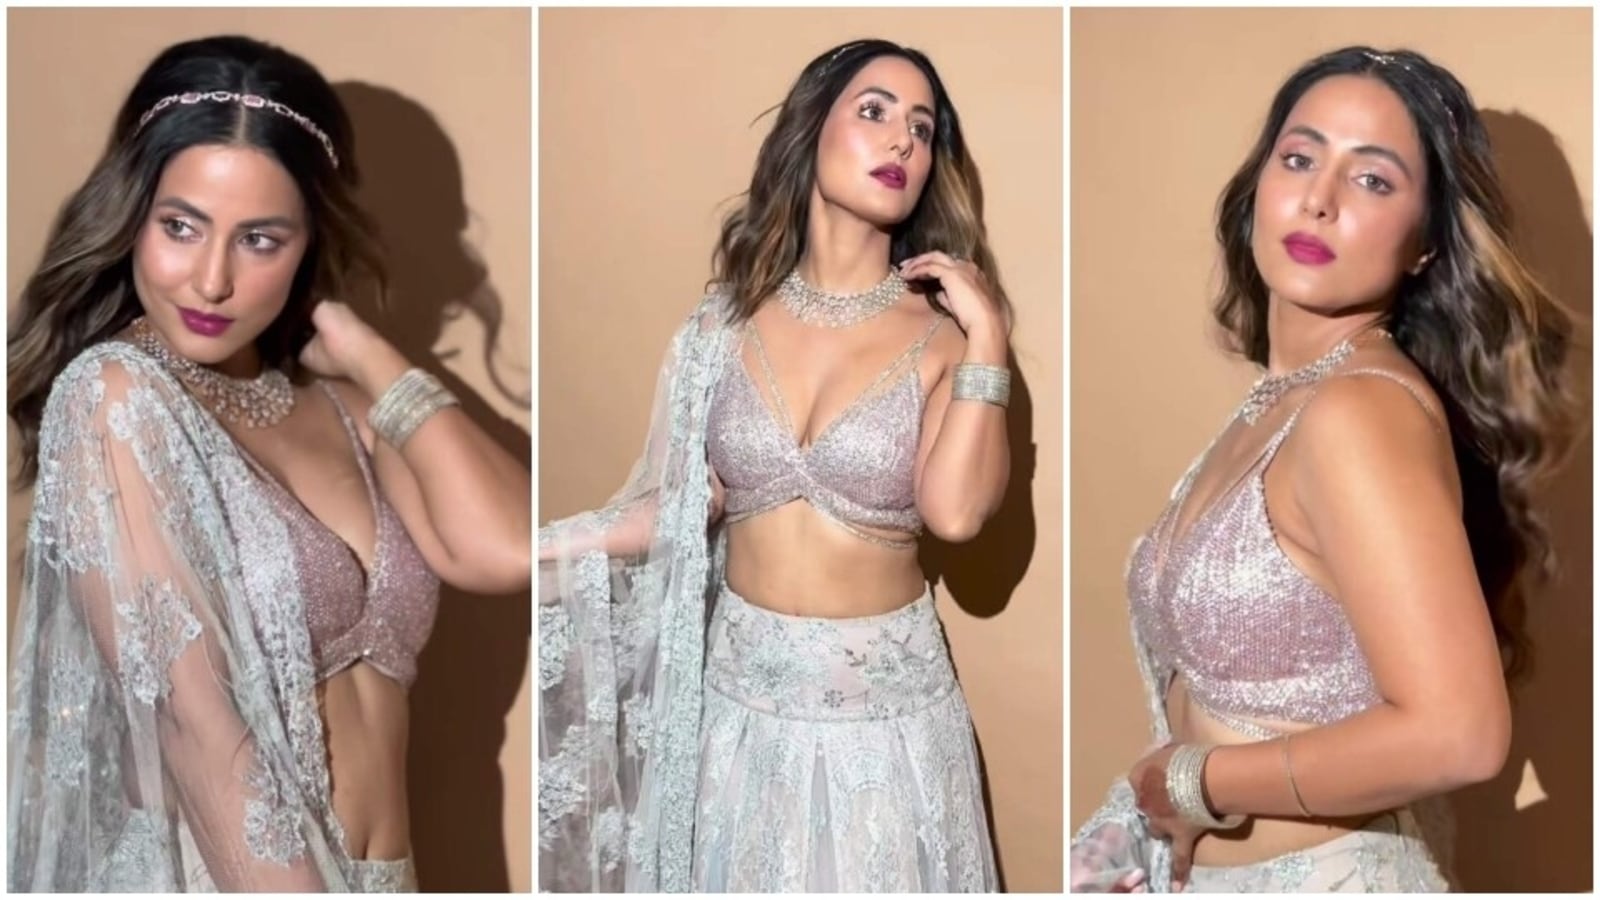 Hina Khan says 'won't let anyone dull my sparkle' as she shines in sultry  ivory lehenga. Watch new video | Fashion Trends - Hindustan Times